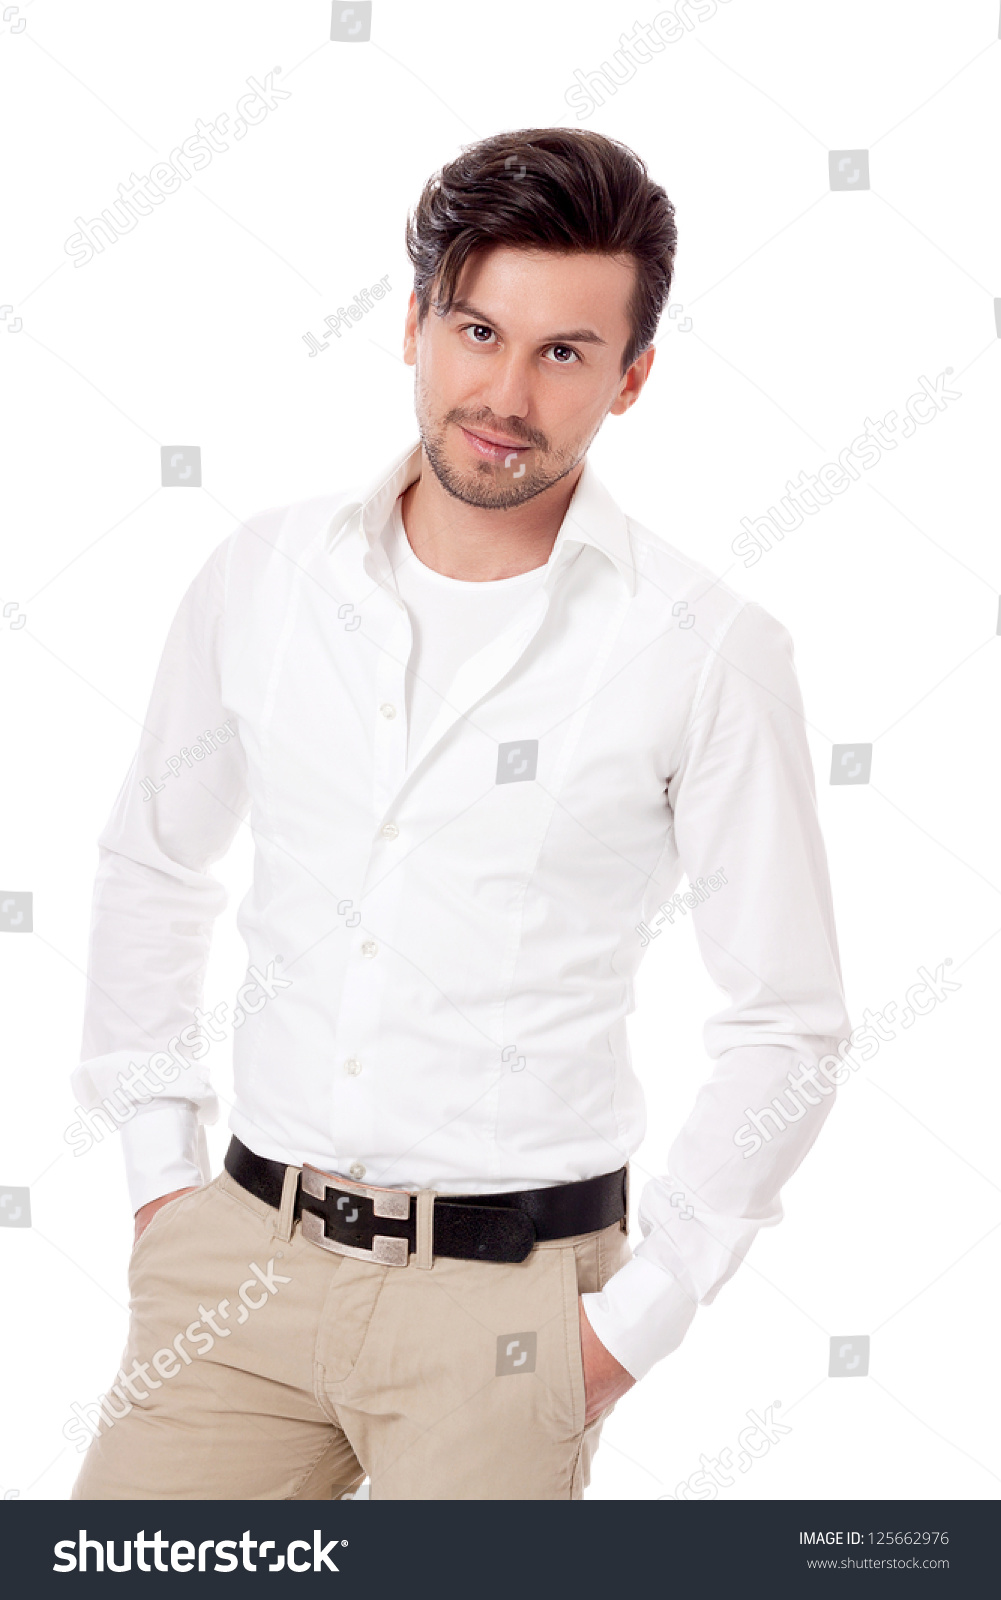 Smiling Successful Man In Casual Business Outfit Isolated On White ...